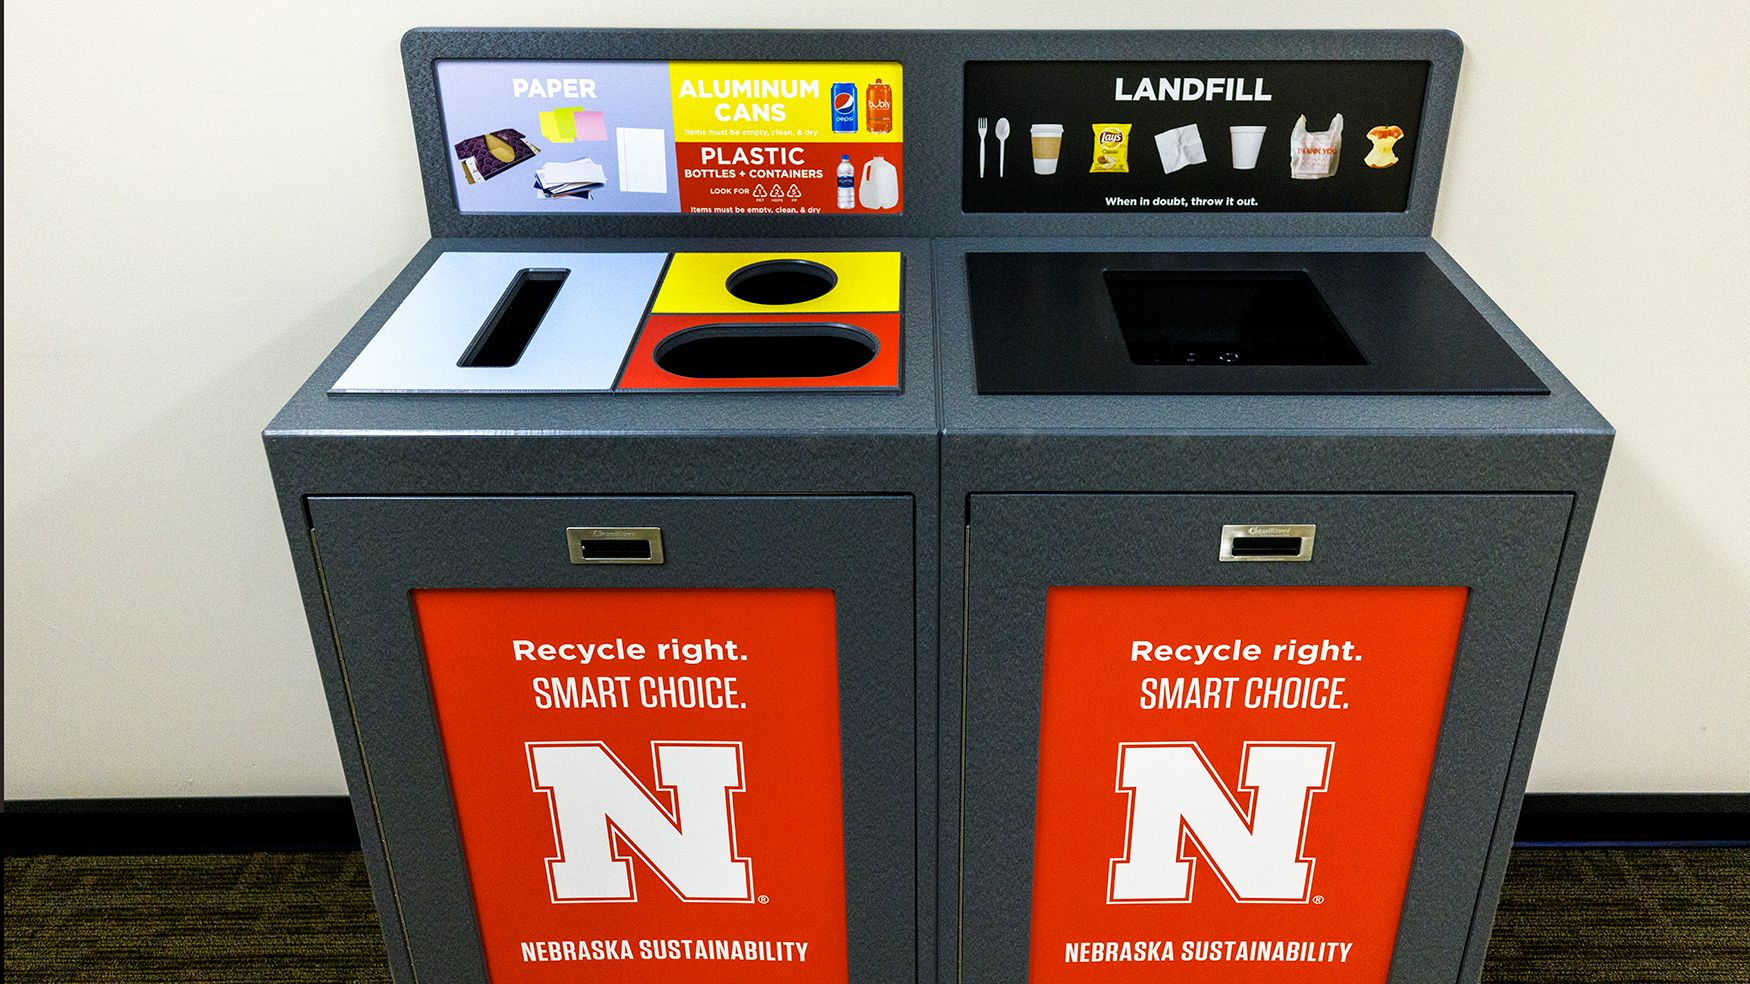 New recycling program rolls out across campus